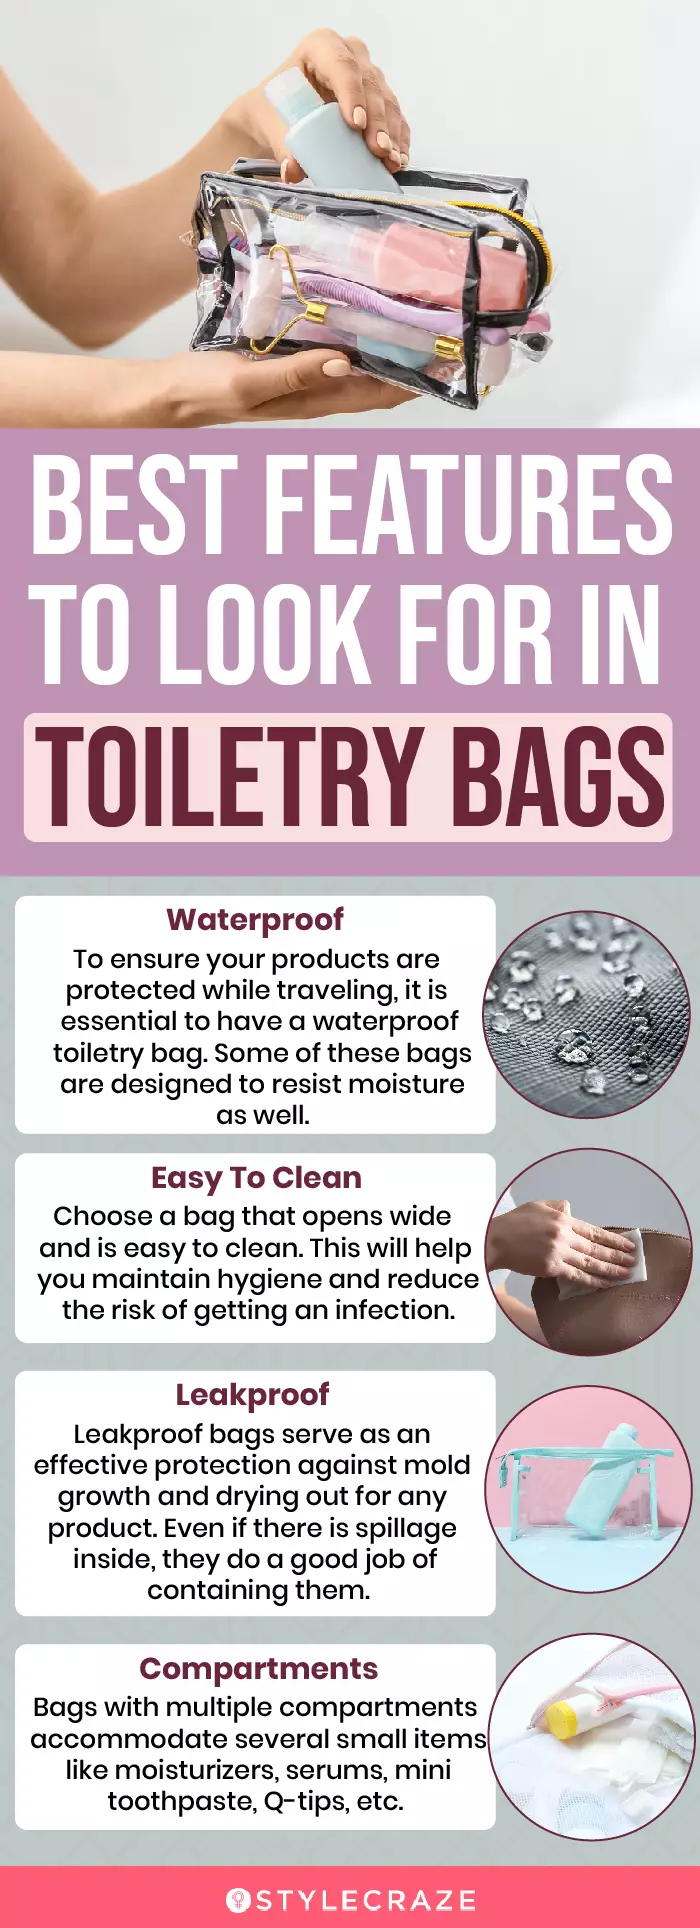 Best Properties To Look For In Toiletry Bags (infographic)